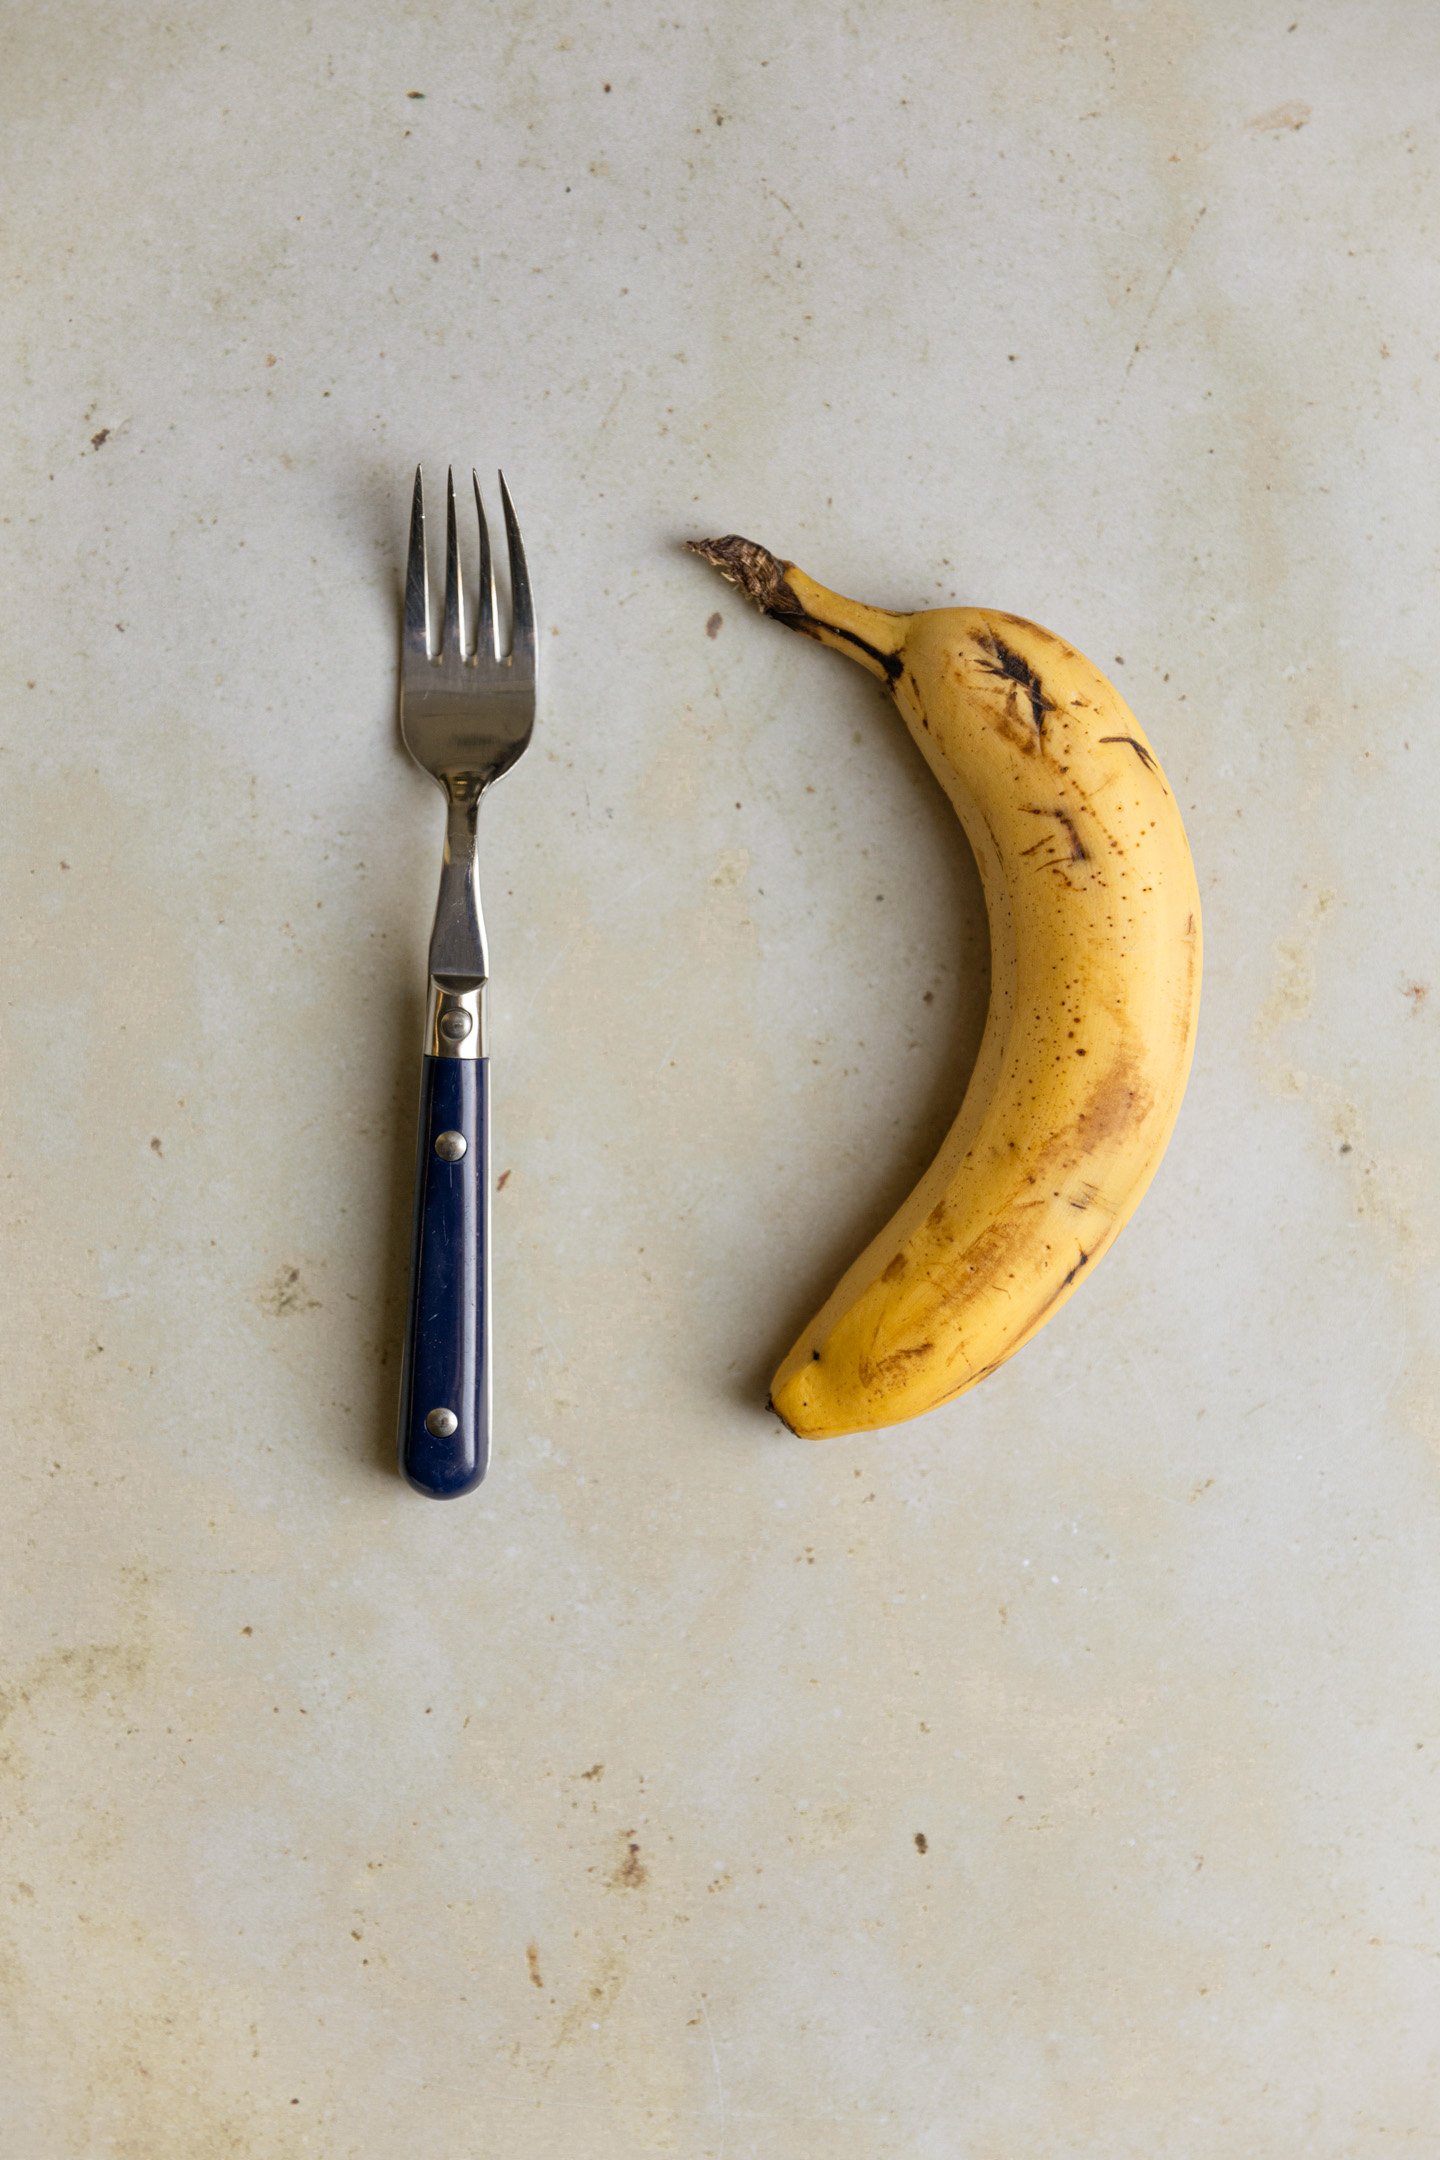 A banana next to a kitchen fork on a beige surface.